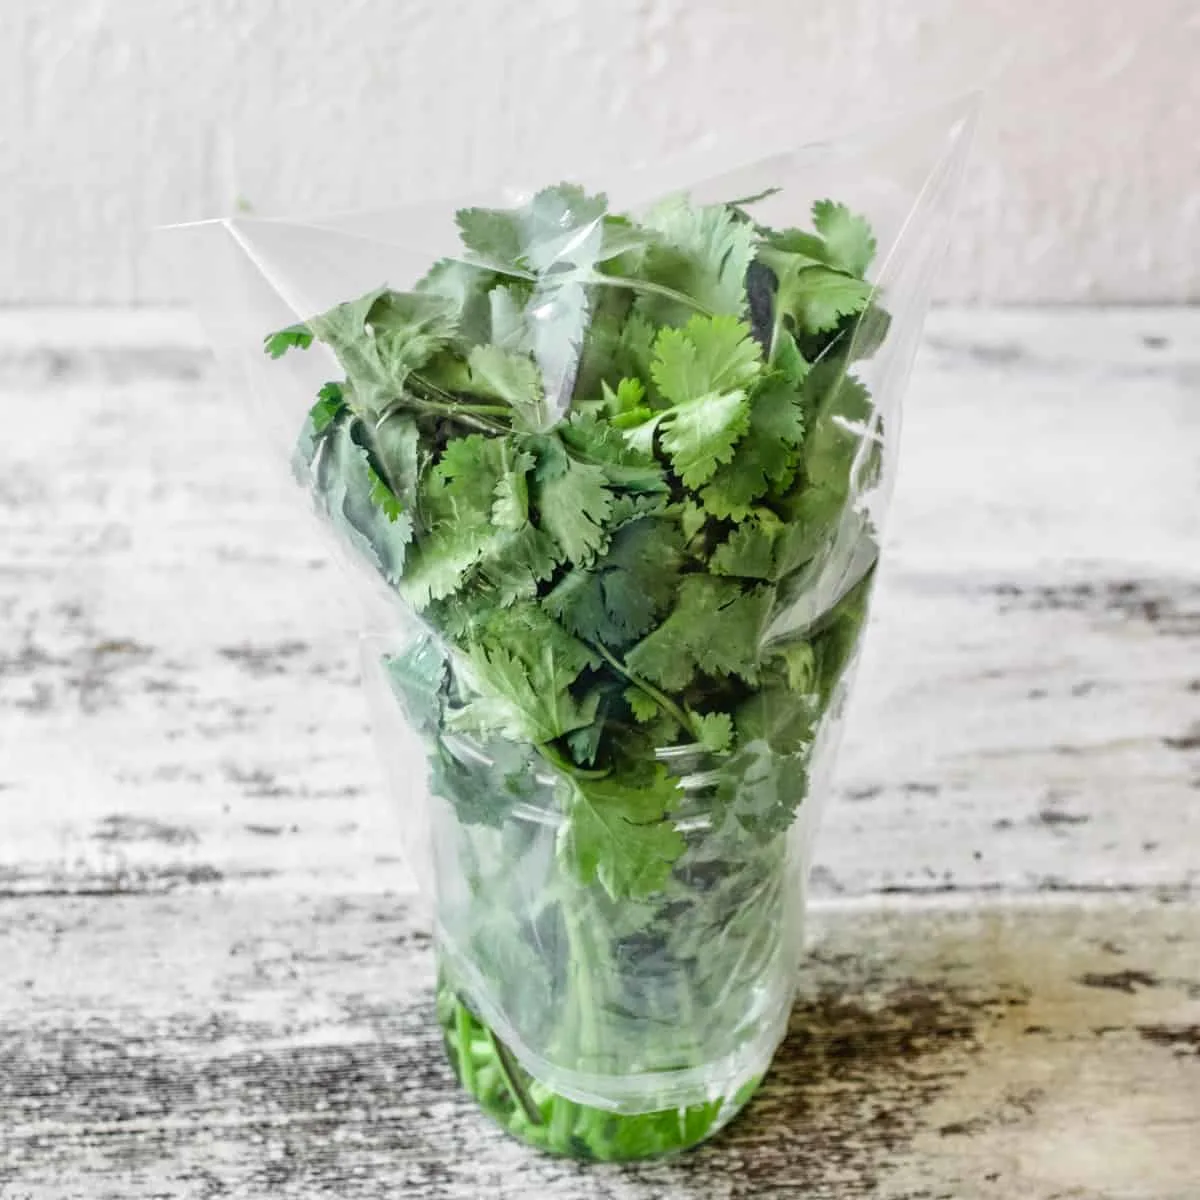 Cilantro in a glass jar of whatever covered with a plastic bag.